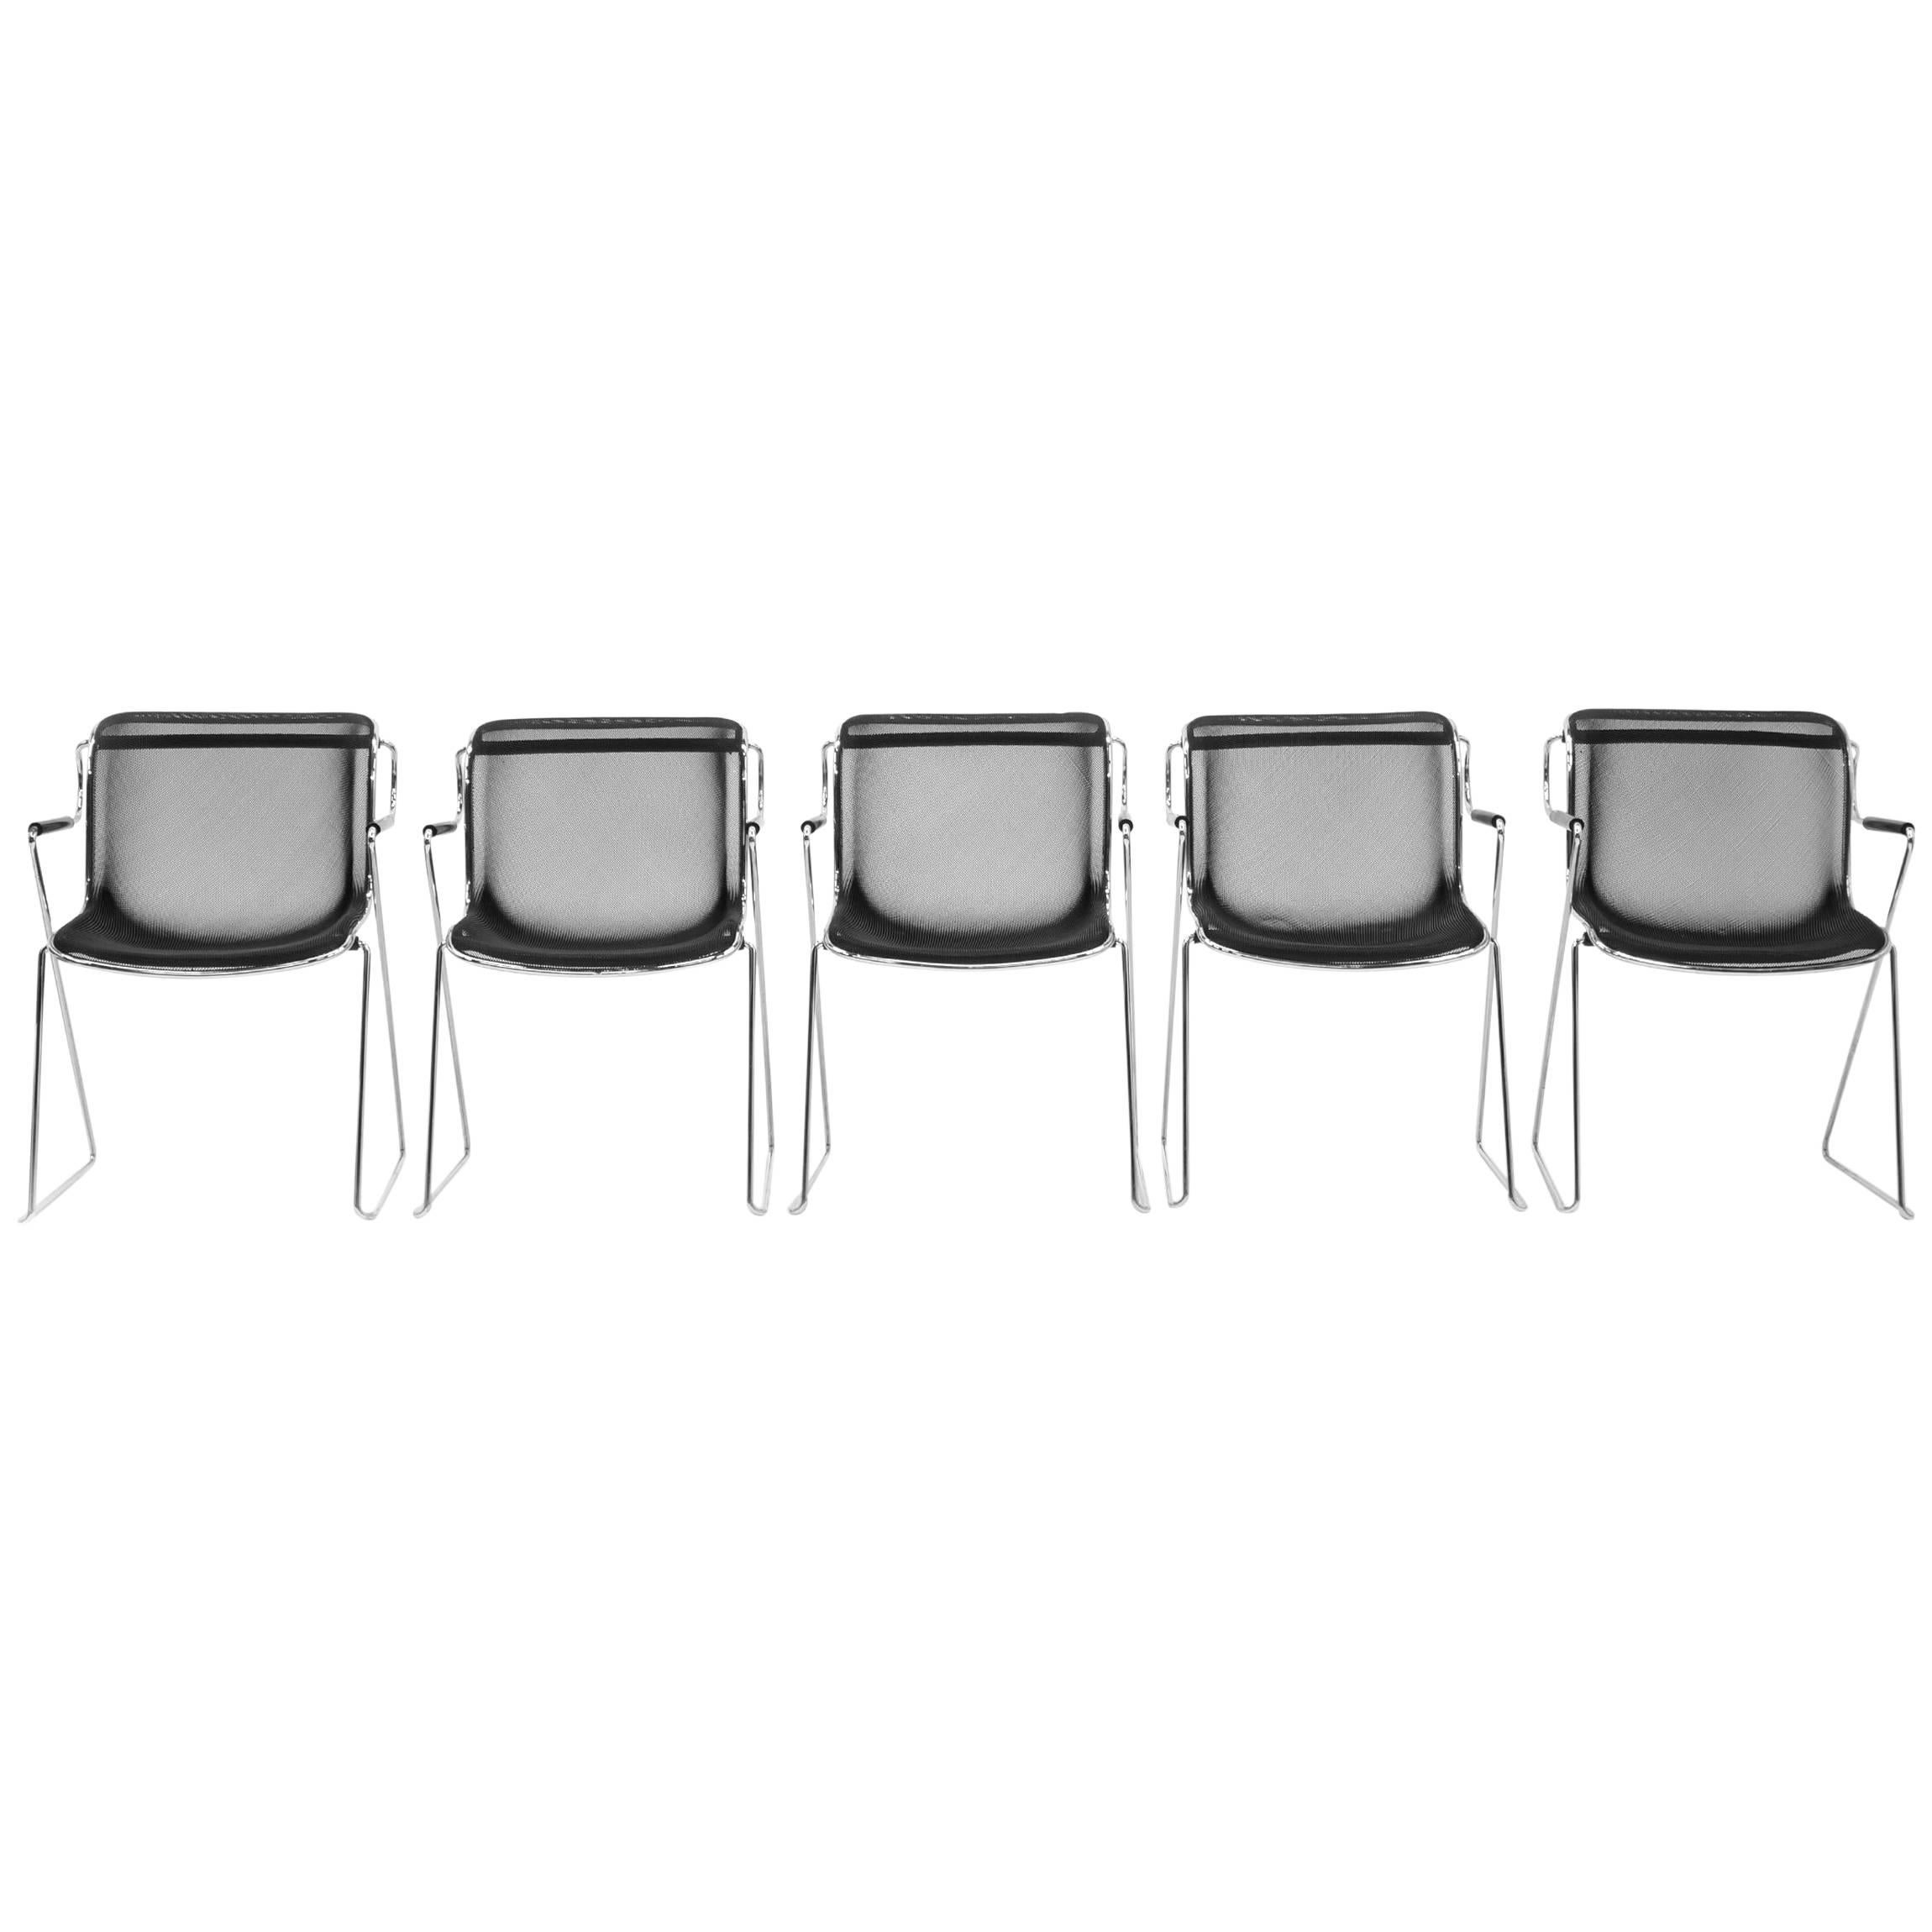 Charles Pollockk Penelope Stacking or Stack Chairs